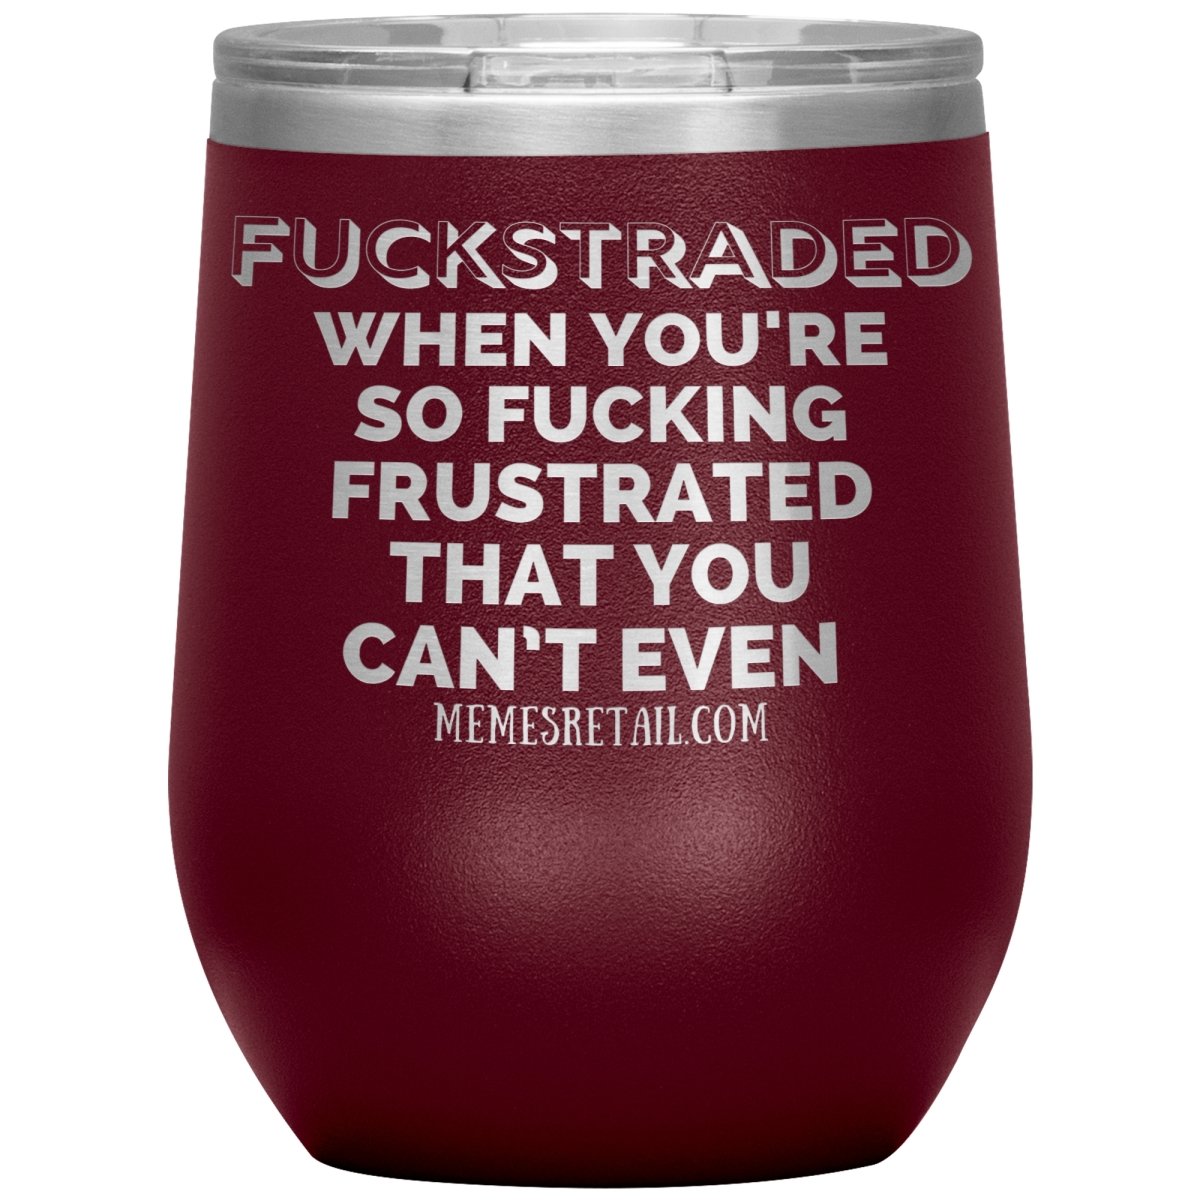 Fuckstraded, When You're So Fucking Frustrated That You Can’t Even Tumblers, 12oz Wine Insulated Tumbler / Maroon - MemesRetail.com